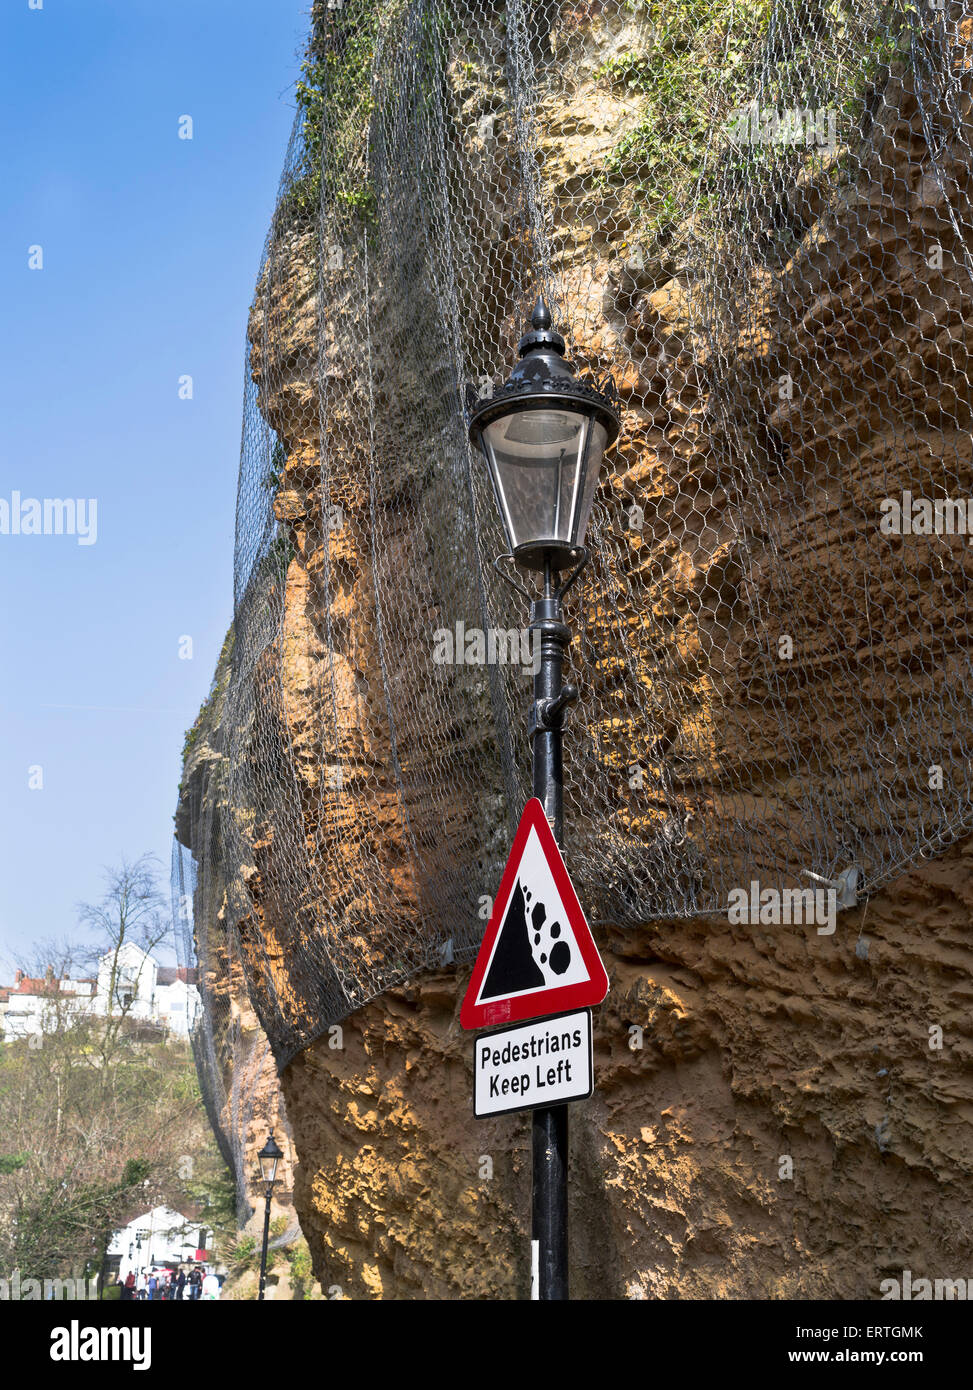 dh Cliff erosion ENVIRONMENT UK Warning sign of falling rocks cliff erosion wire mesh hazard triangle safety Stock Photo